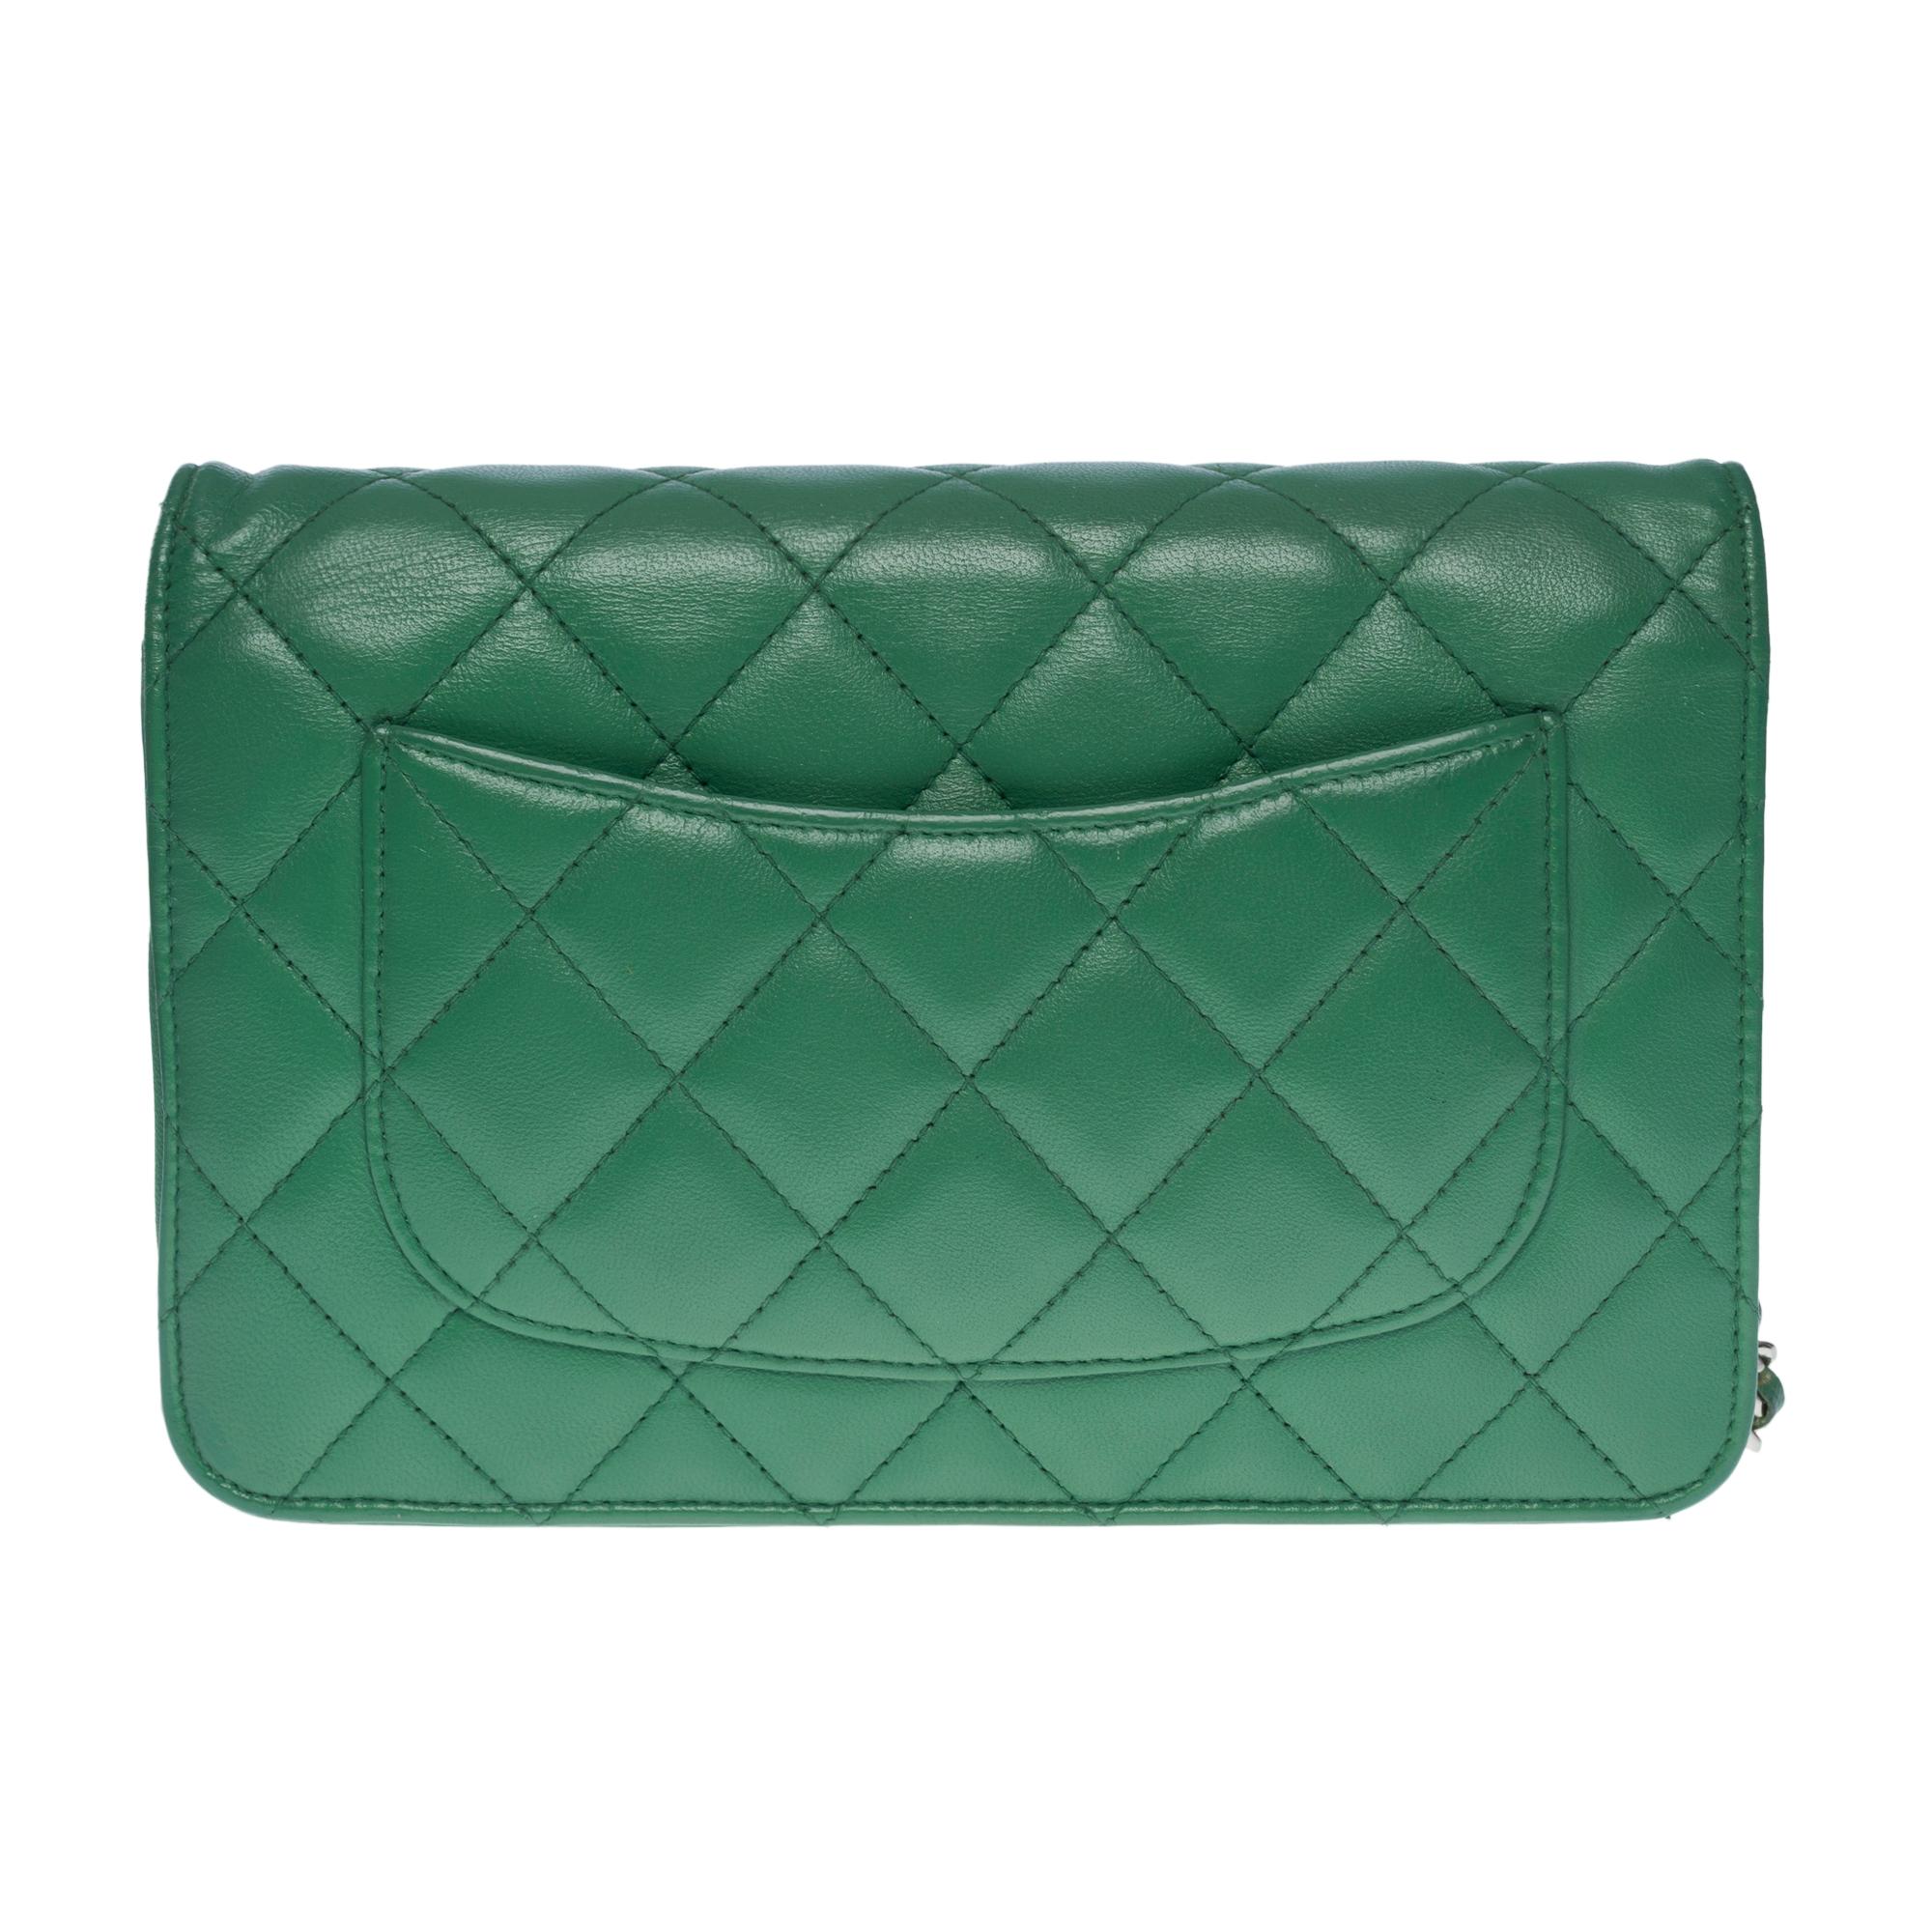 Lovely Chanel Wallet On Chain (WOC) shoulder bag in green quilted lambskin leather, silver metal hardware, a silver metal chain handle interwoven with green leather for a shoulder or crossbody carry
A patch pocket at the back of the bag
Closure by